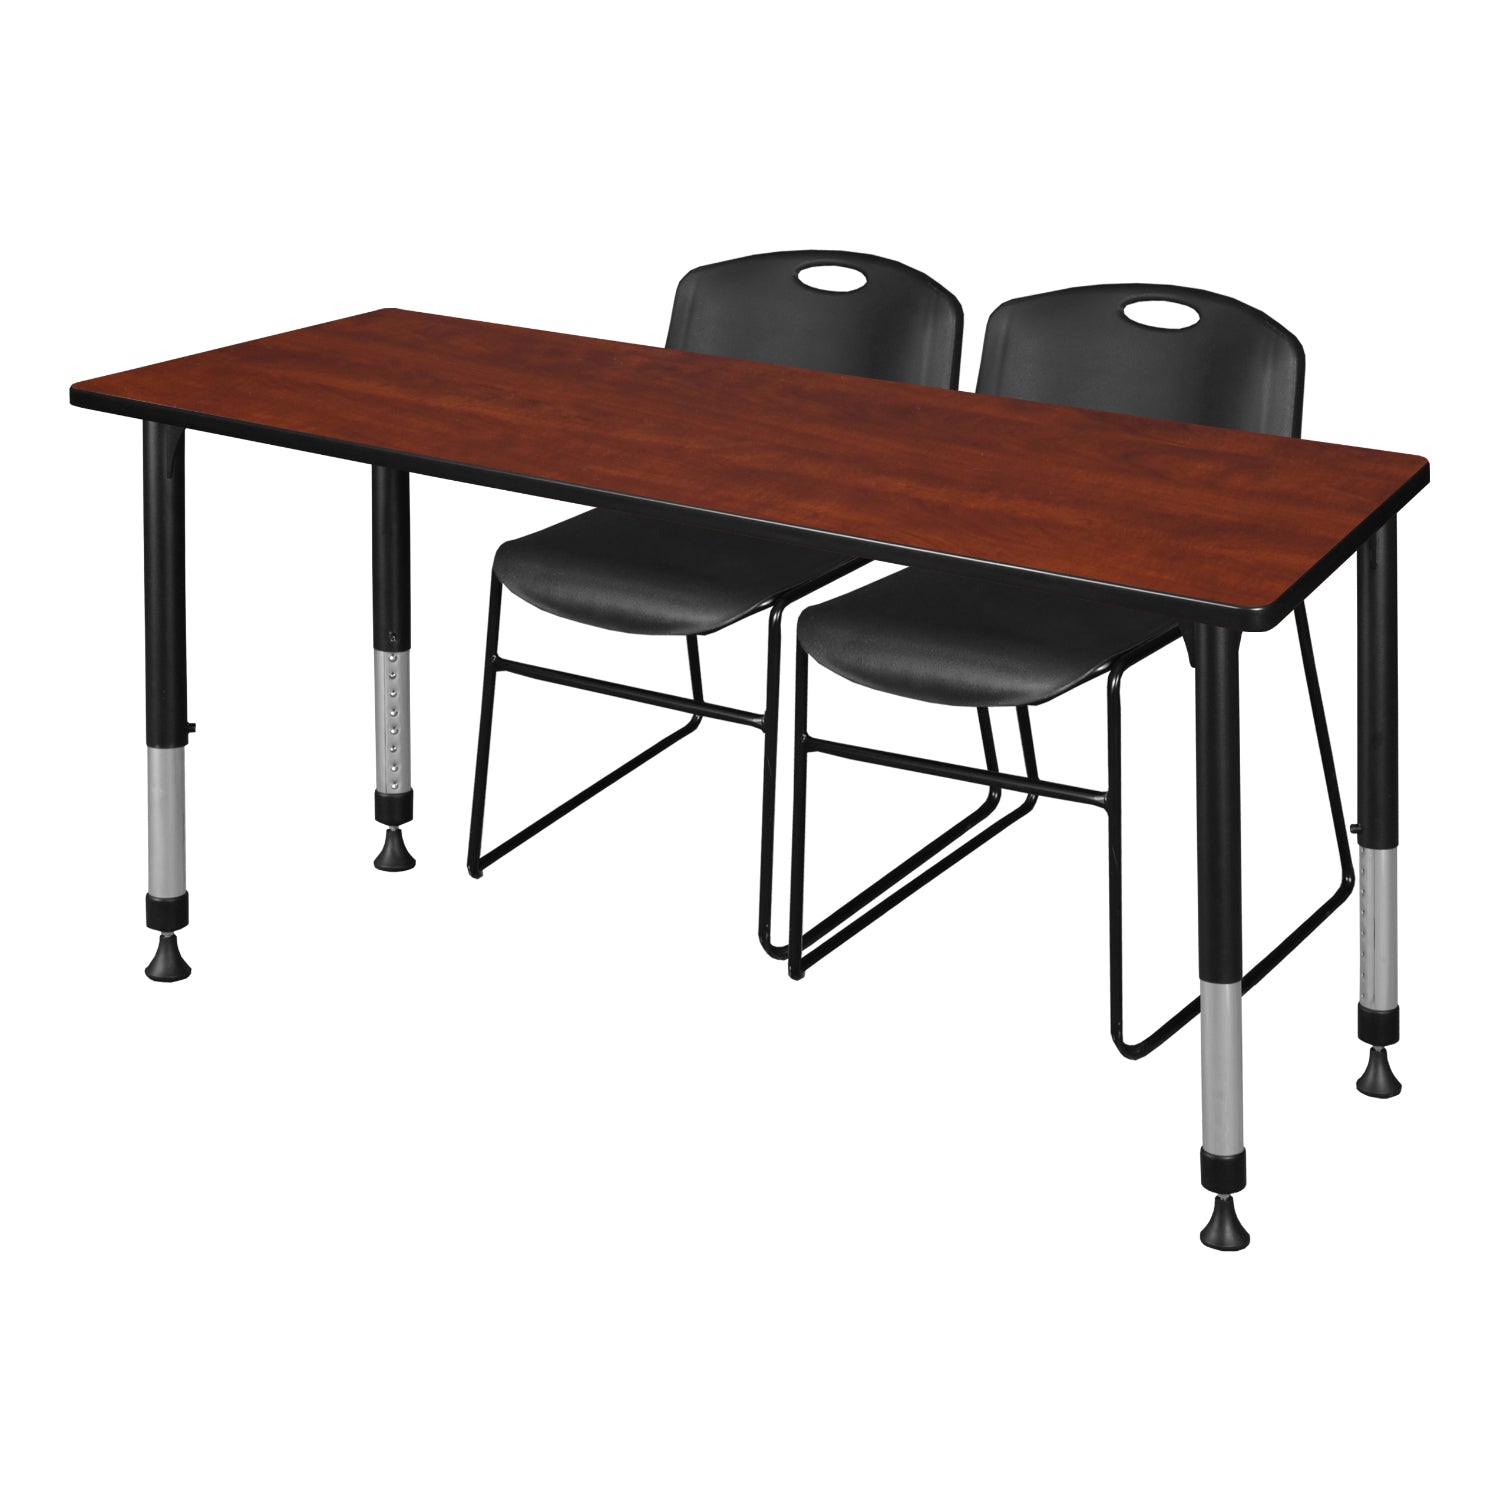 Kee Classroom Table and Chair Package, Kee 66" x 30" Rectangular Adjustable Height Table with 2 Black Zeng Stack Chairs